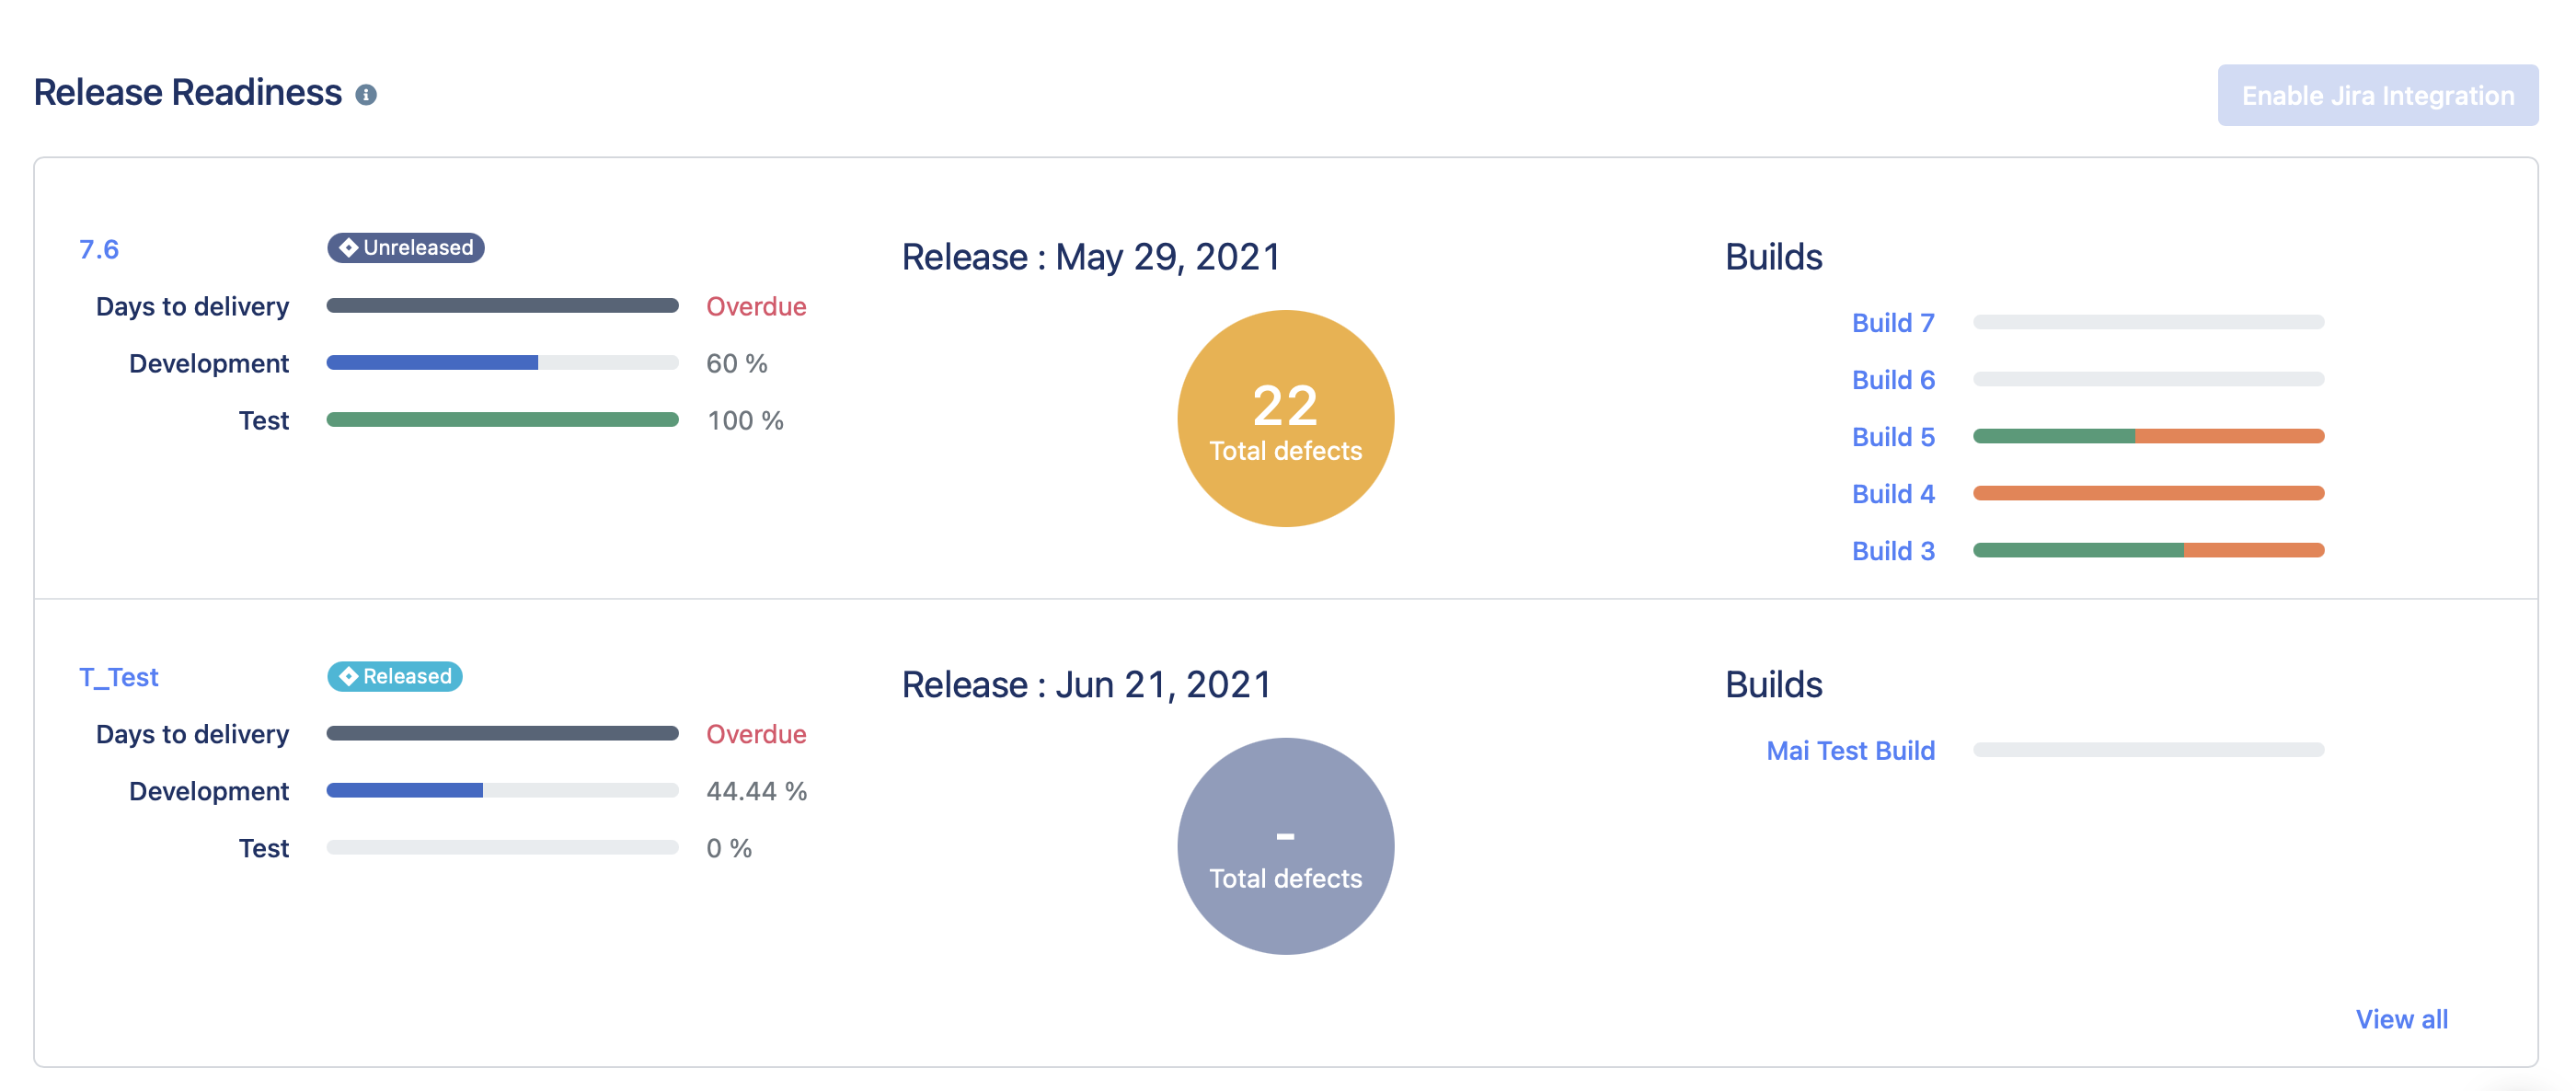 Release readiness reports